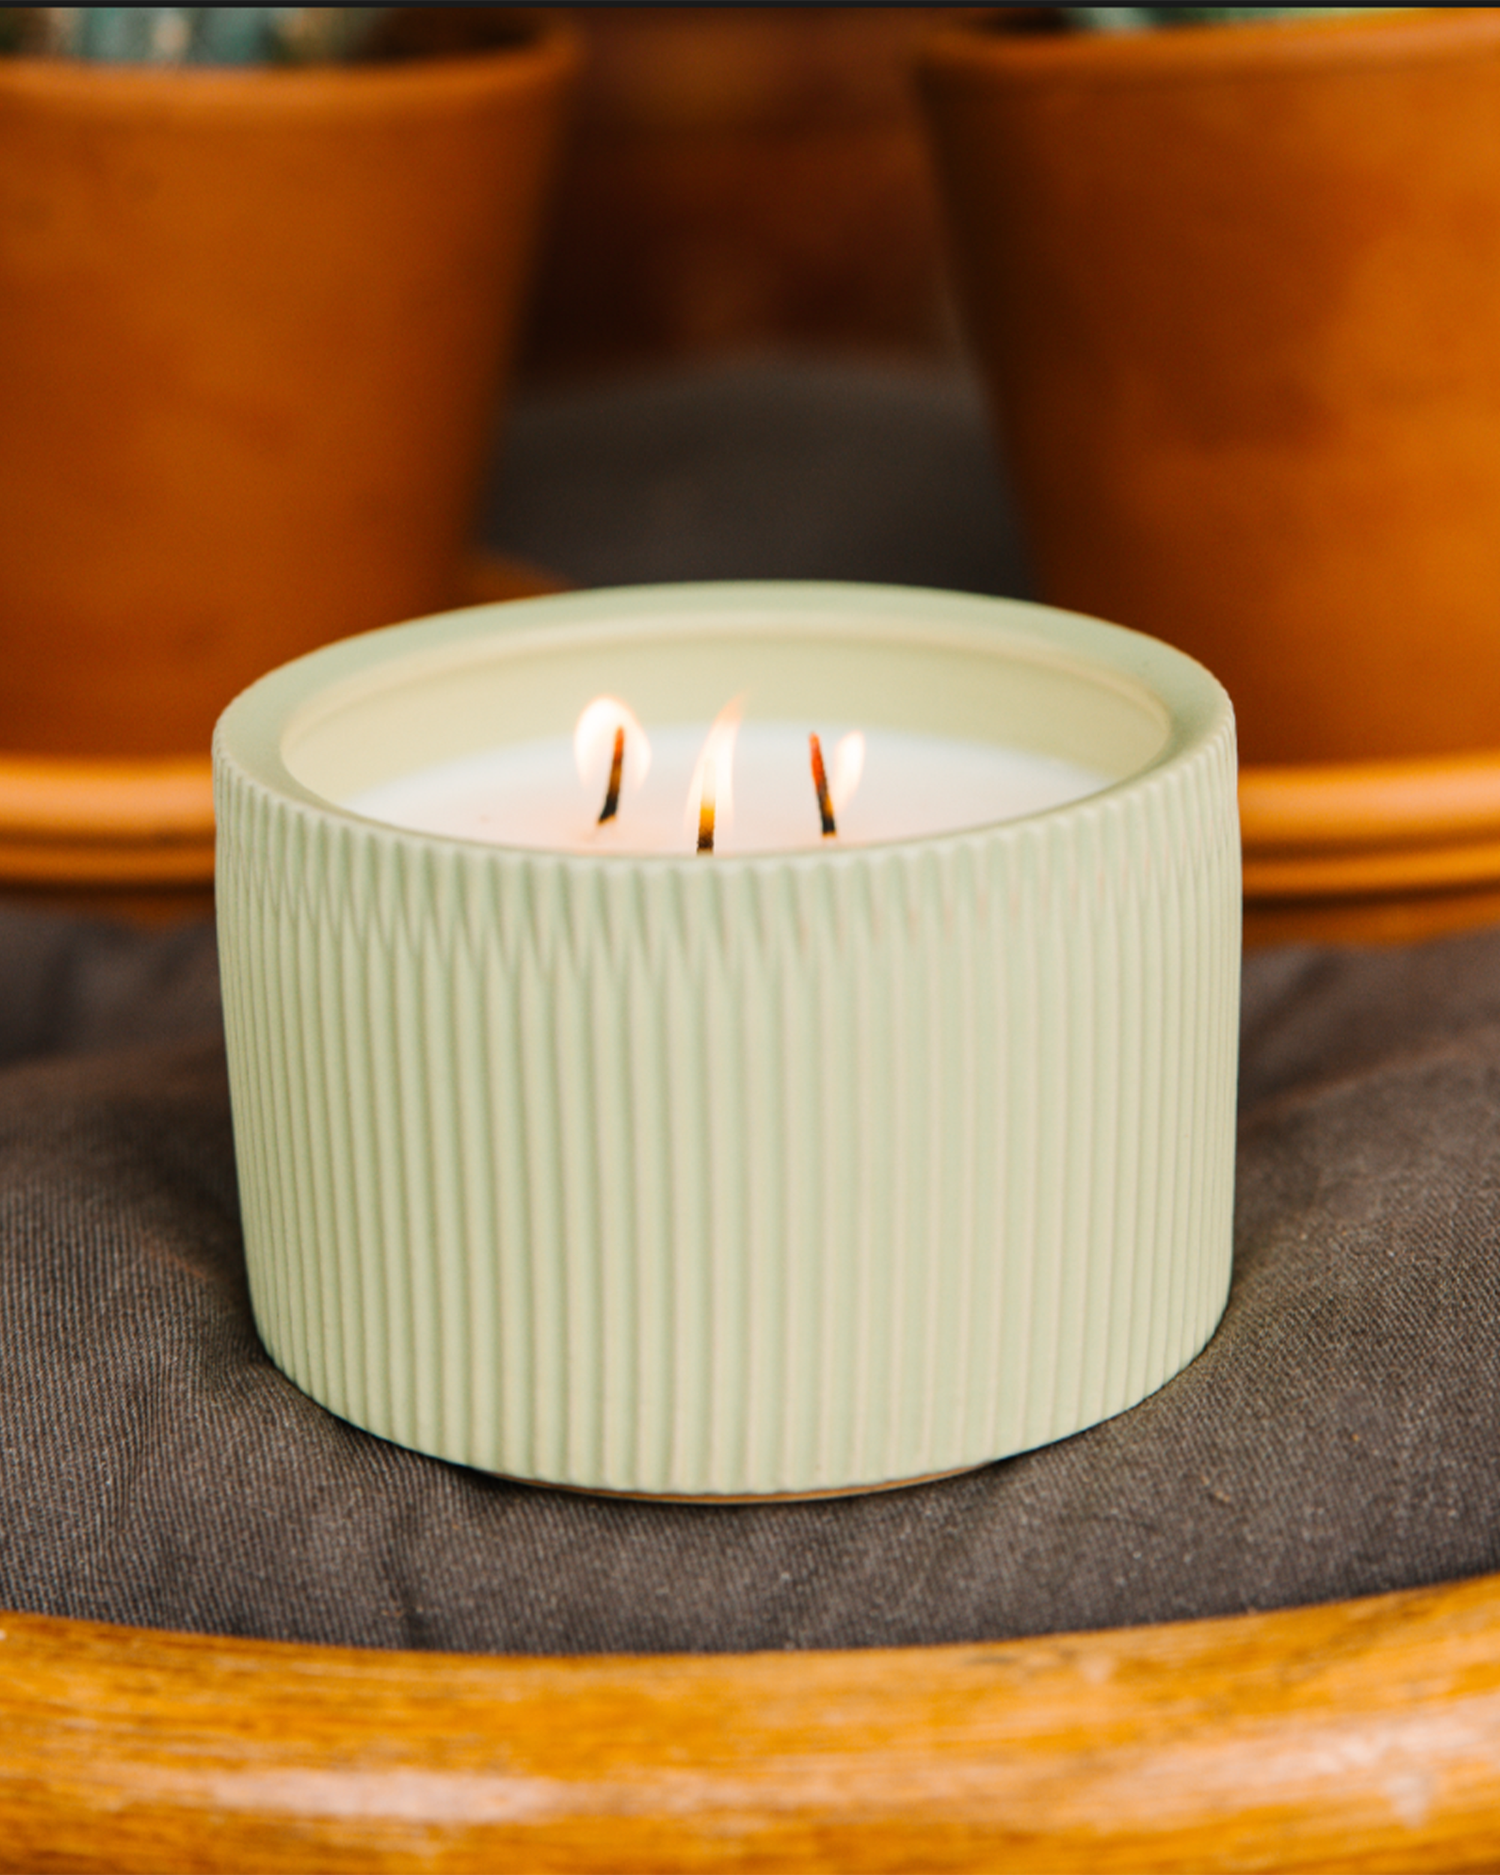 An image of a light green 3-Wick Ceramic candle scented like Agave Cactus.